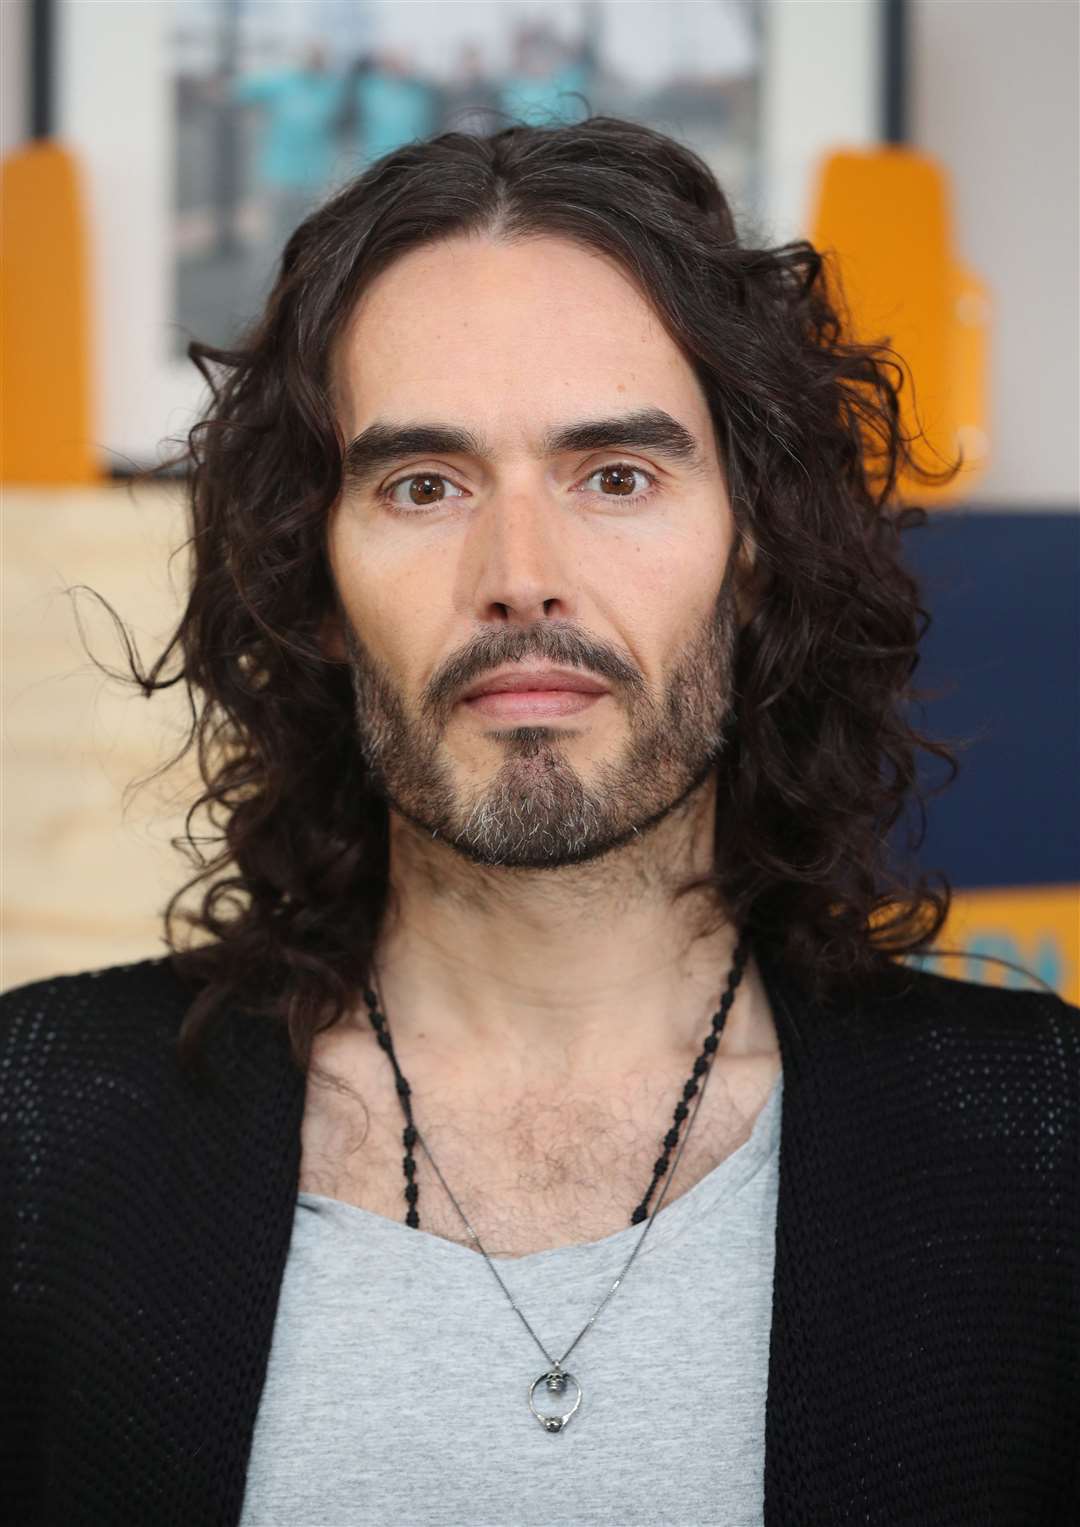 Russell Brand strongly denies the allegations (Jonathan Brady/PA)